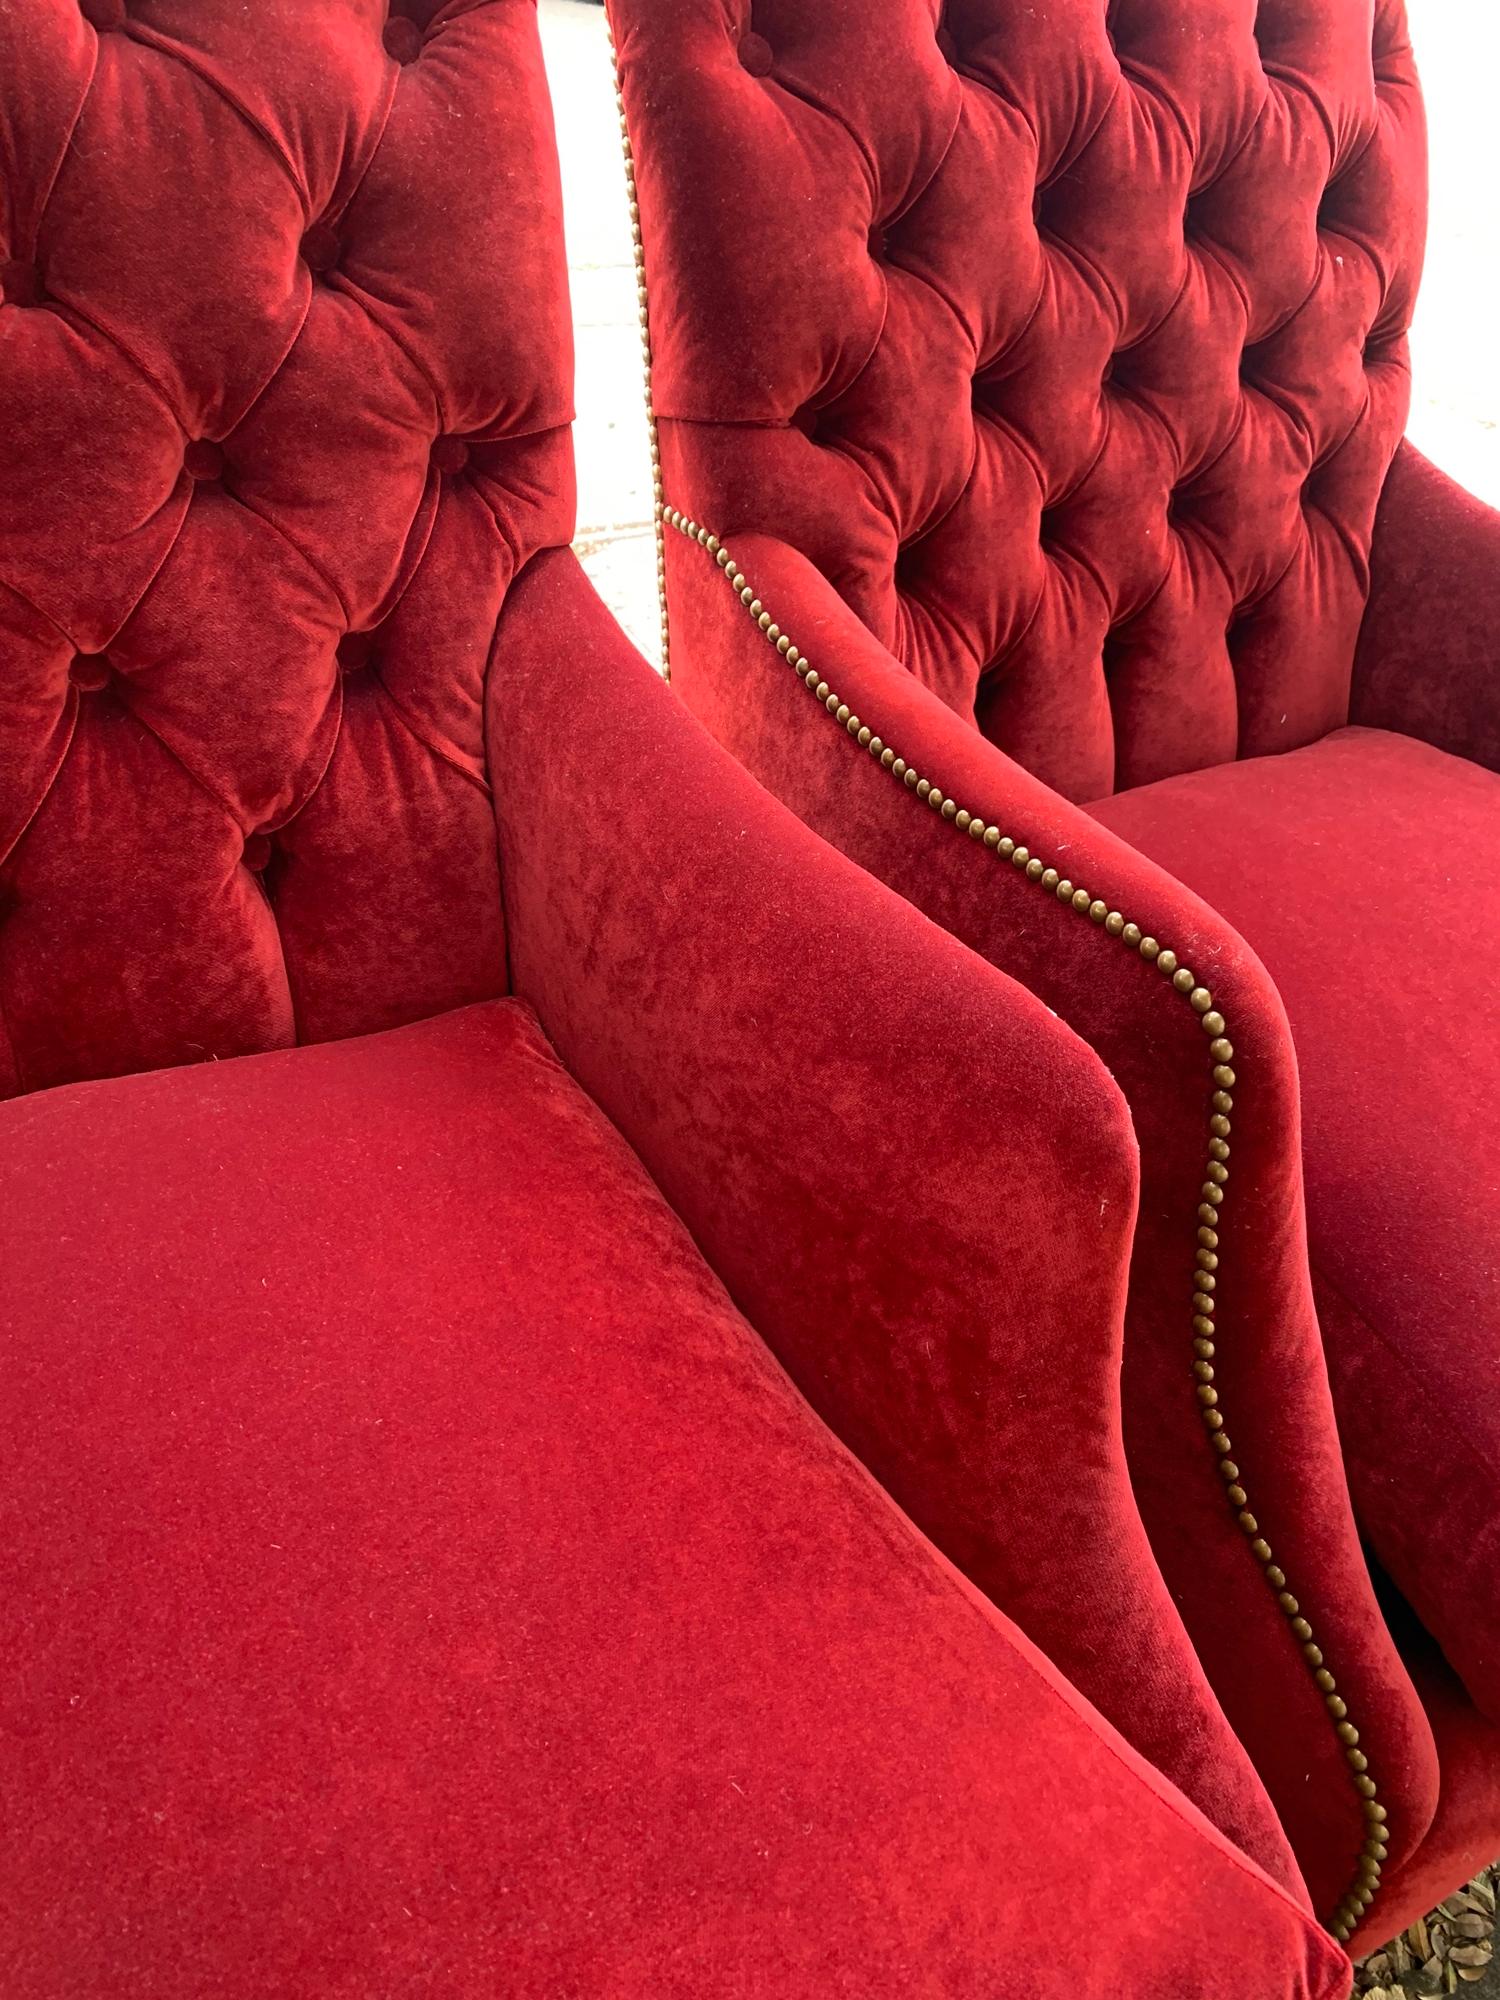 Pair of English Style Armchairs with Tufted Backs, Upholstered in Red Velvet 1